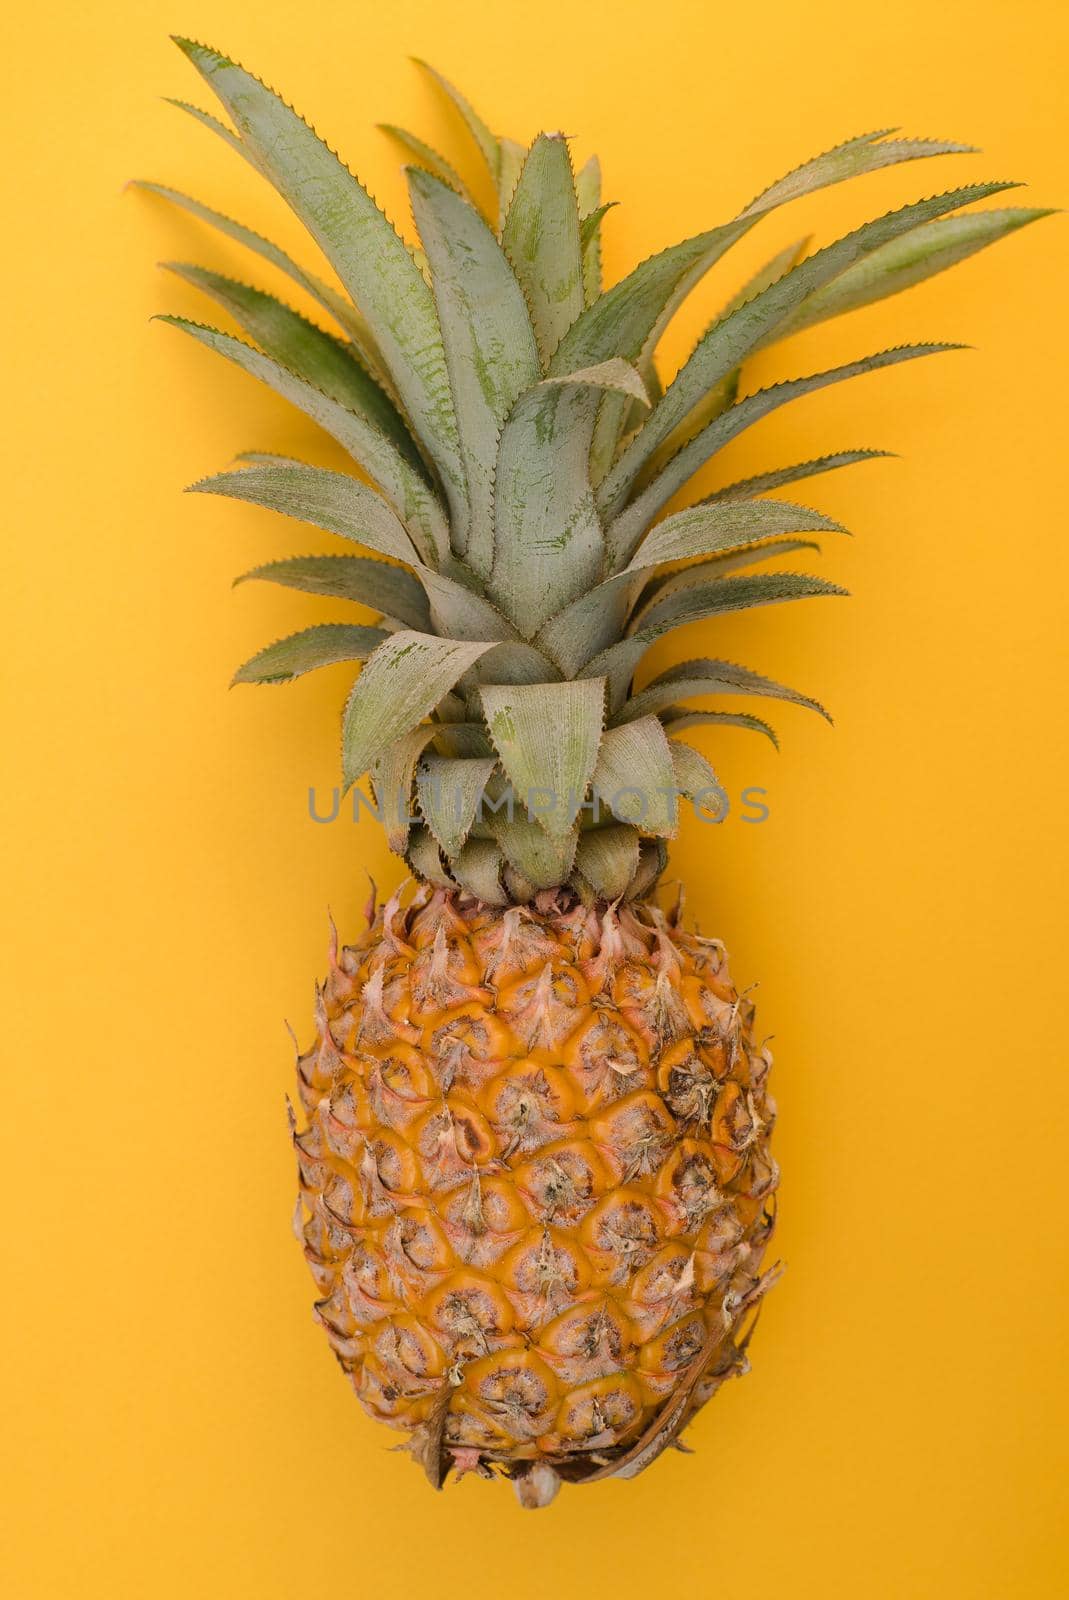 Yellow Thai pineapple and green Thai bananas on a yellow bright background